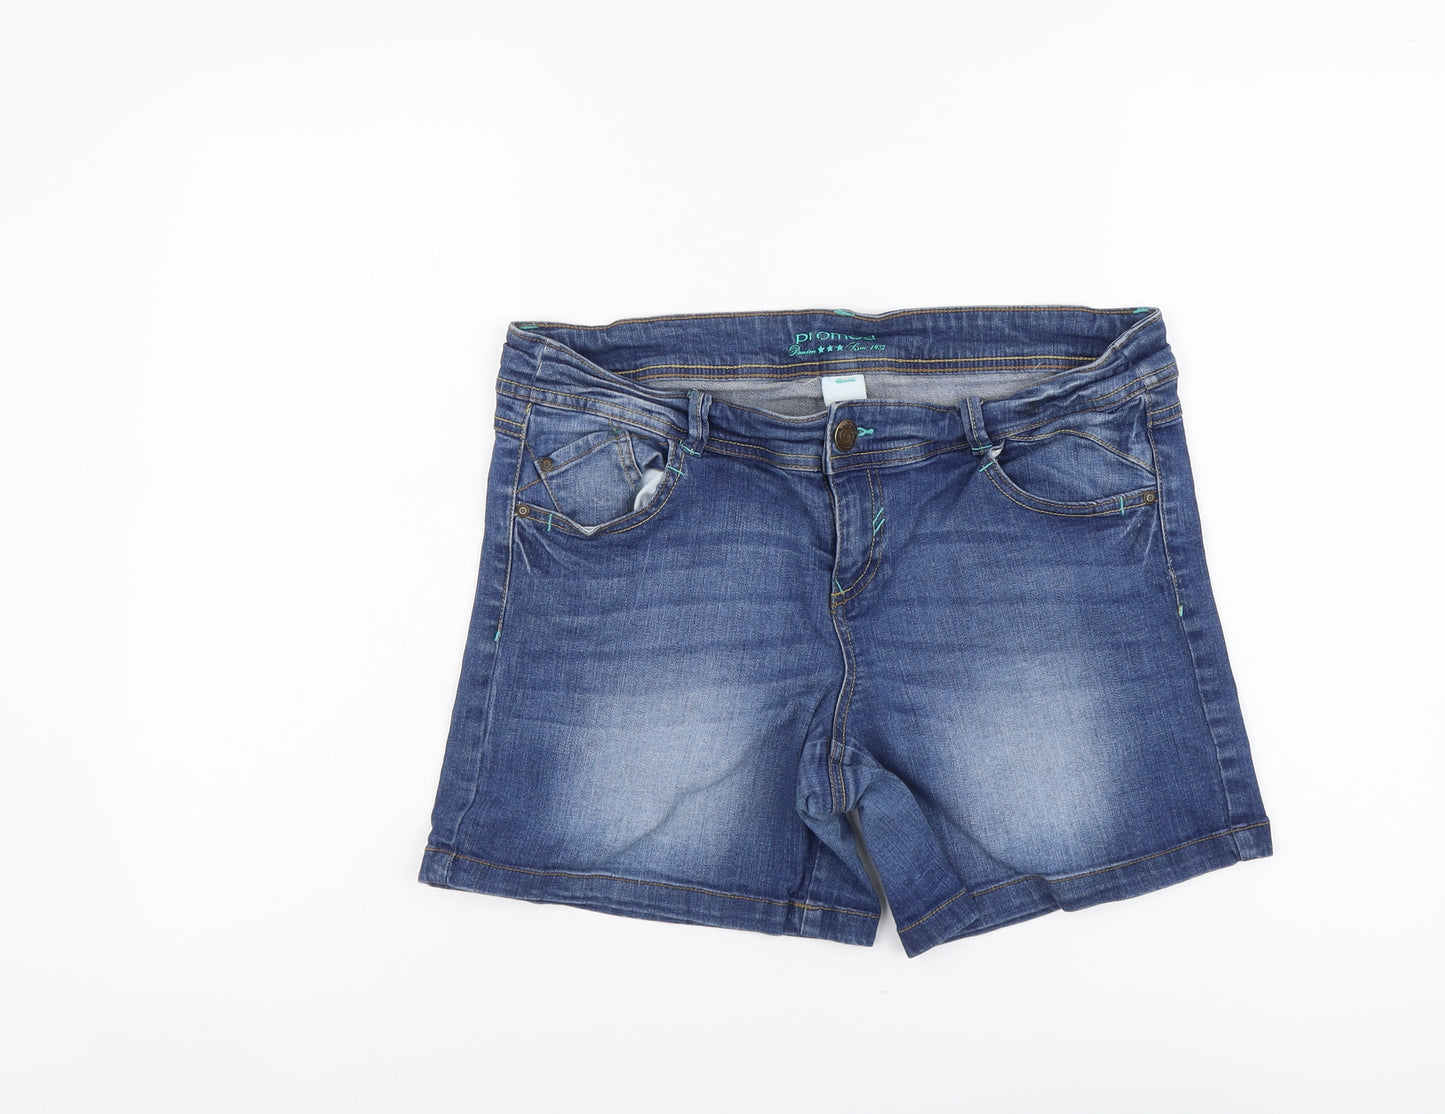 Promod Womens Blue Cotton Mom Shorts Size 34 in L6 in Regular Button